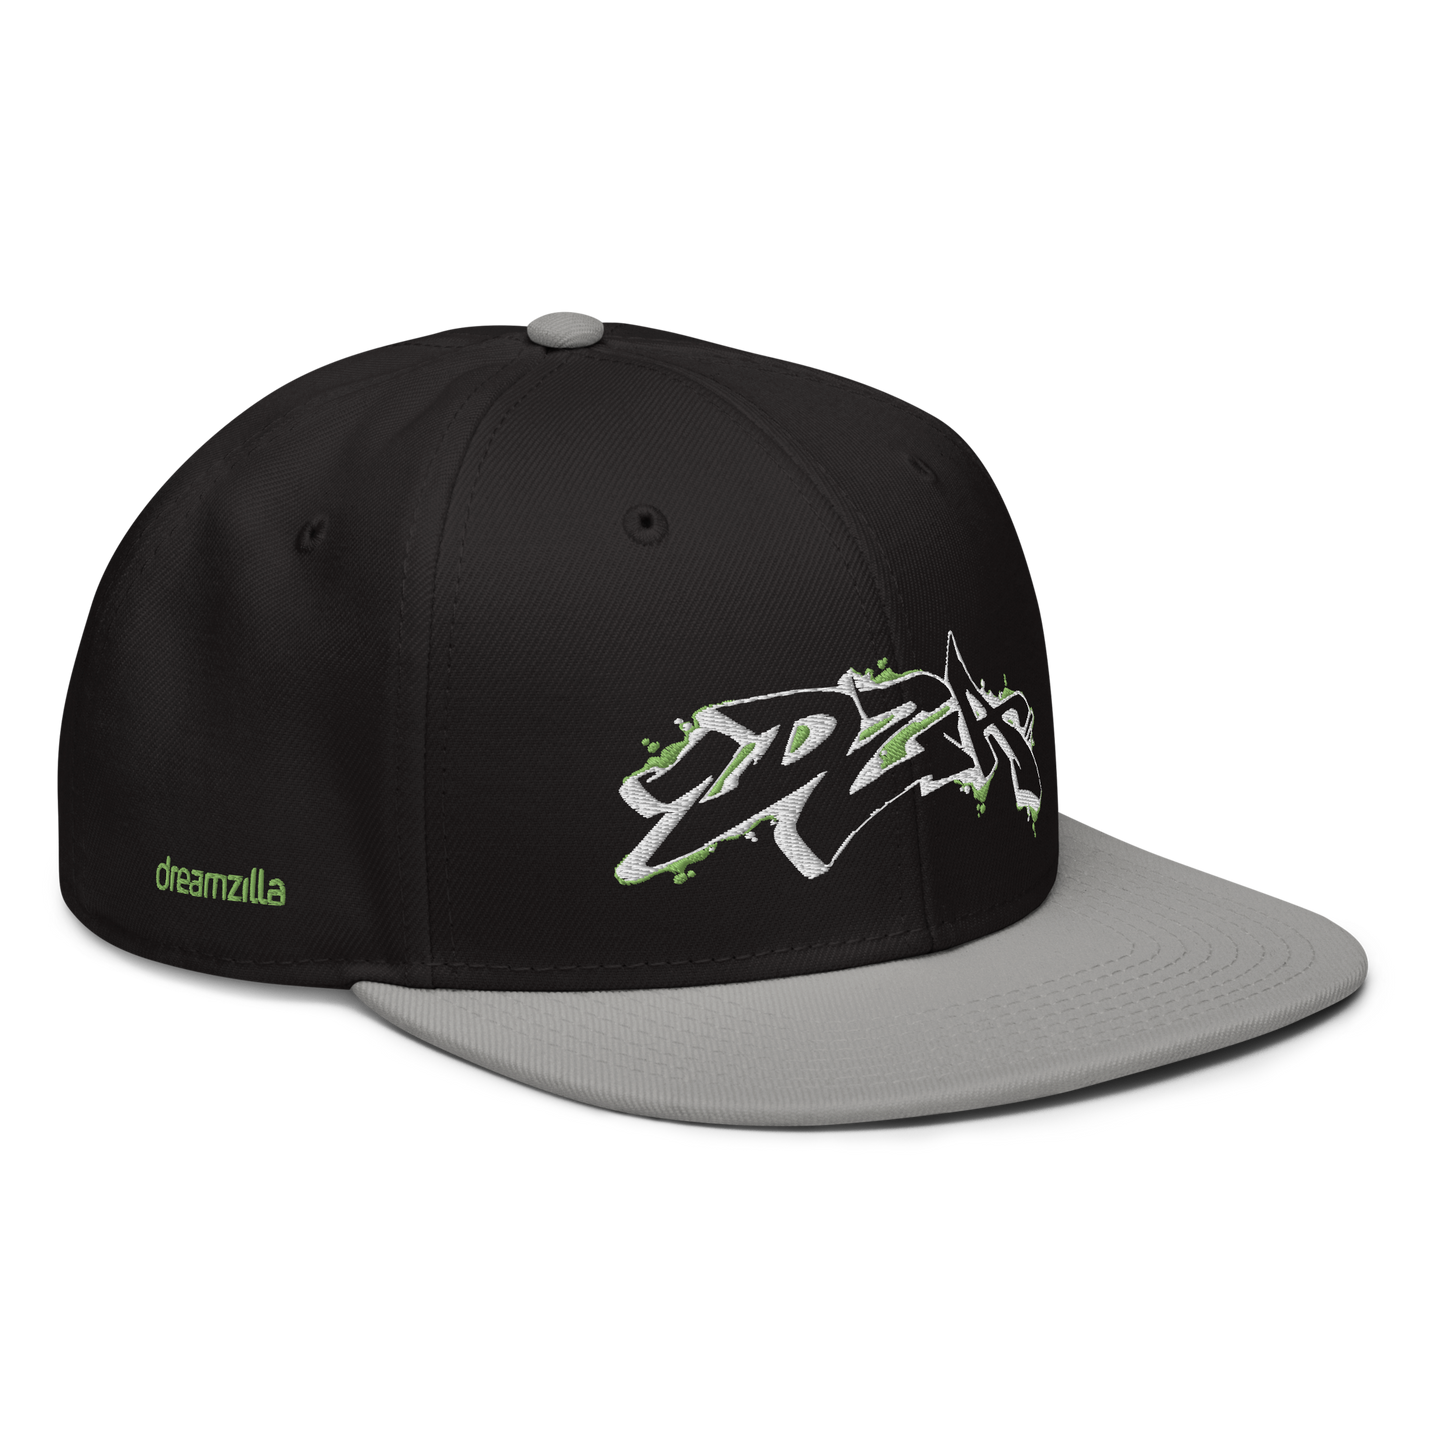 Angled View of Graffiti DZA Snapback by Sanitor in Black with Gray Brim